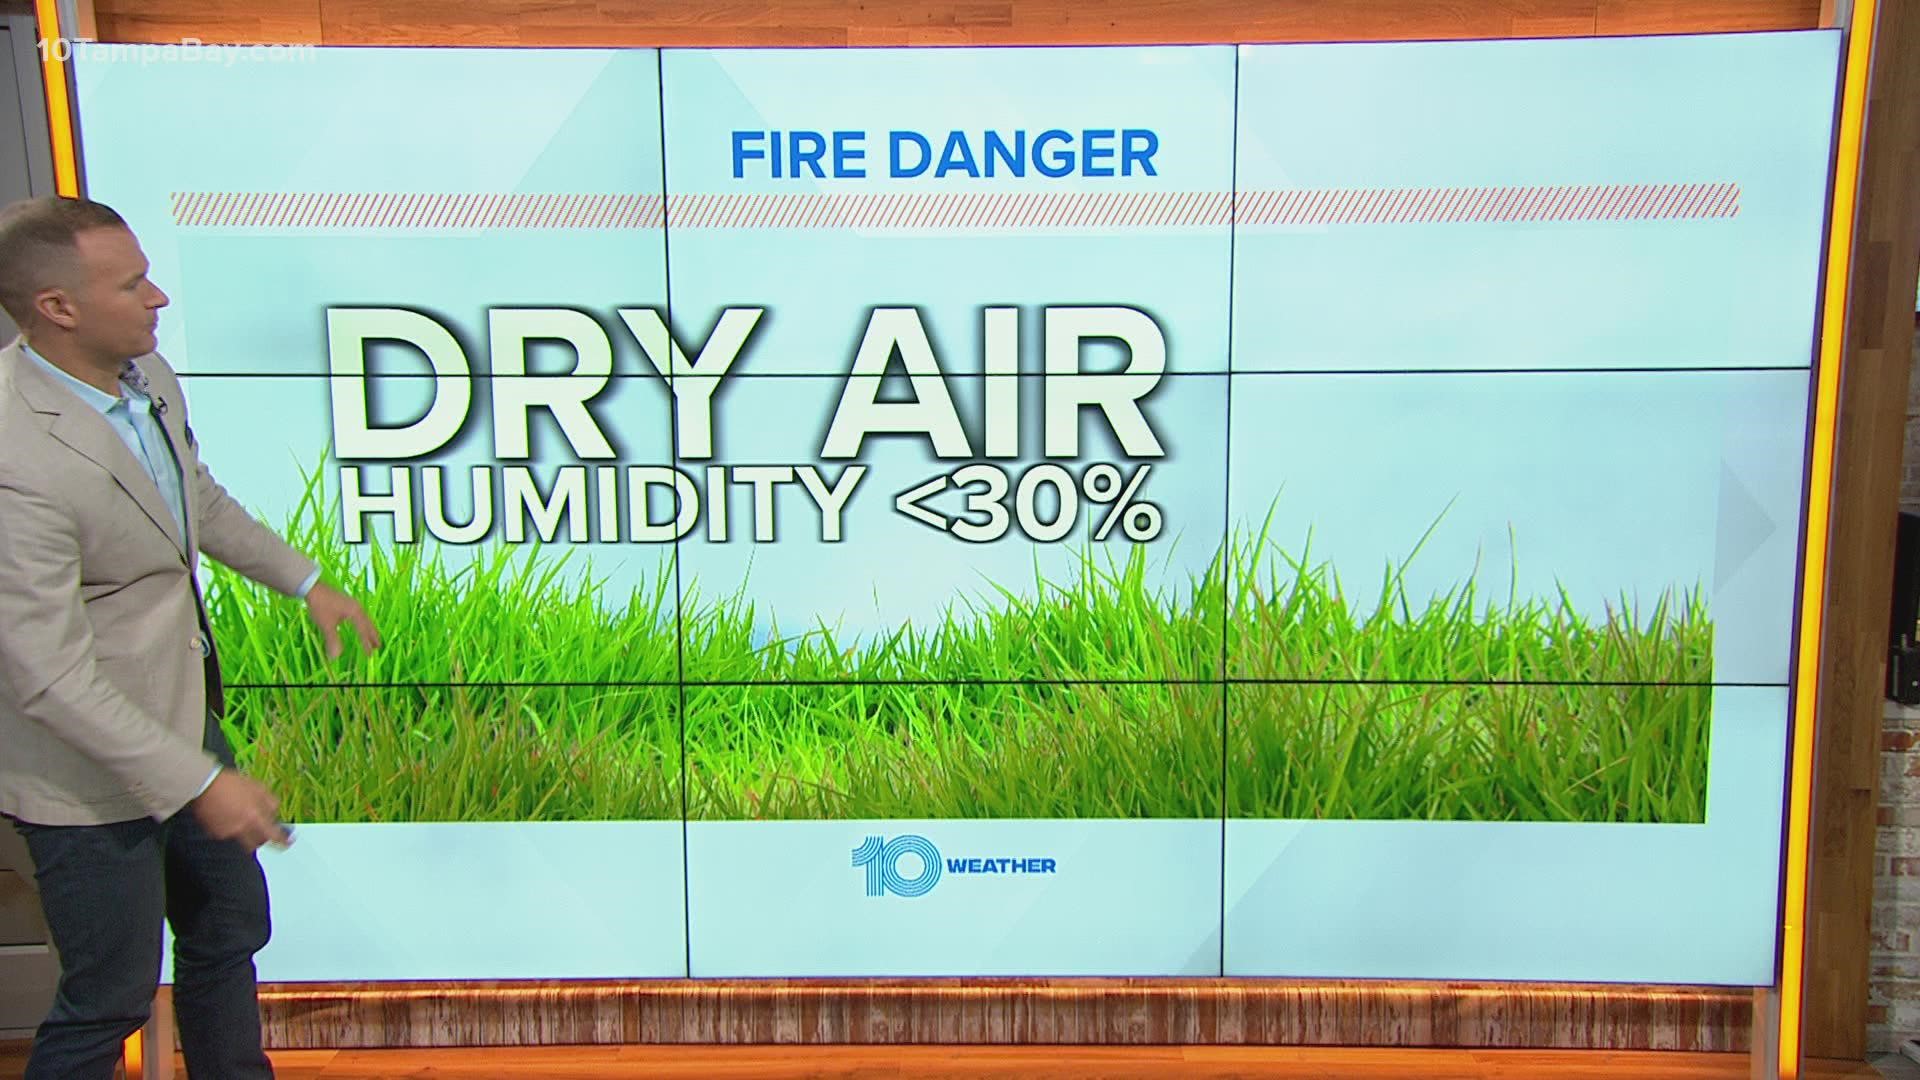 Dry air coupled with low humidity and increased wind speeds create conditions for fires to spread quickly.